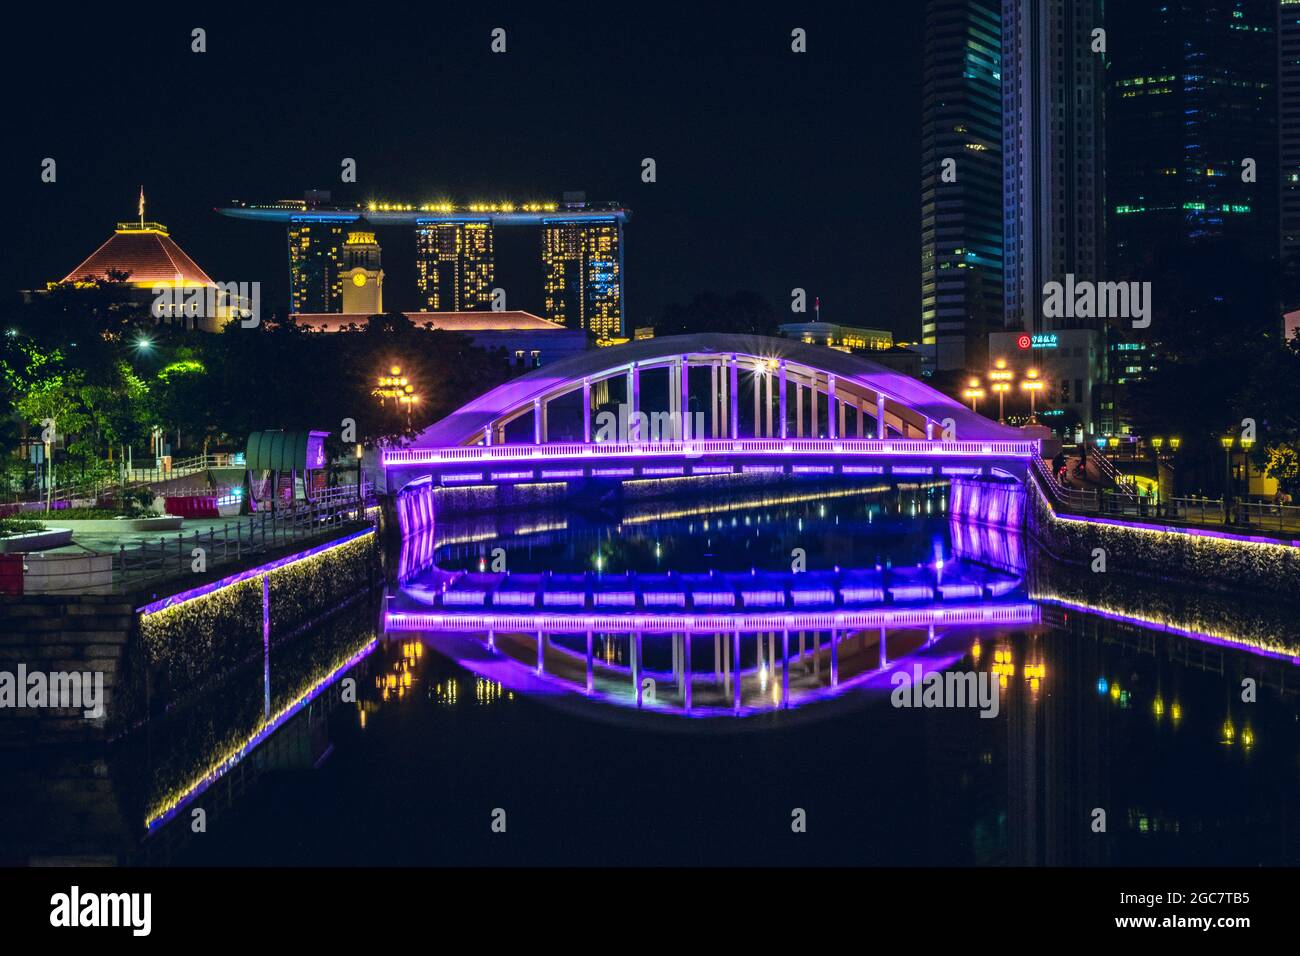 Scenic night view with clear calm water reflection of a vehicular box girder bridge across the Singapore River. Stock Photo